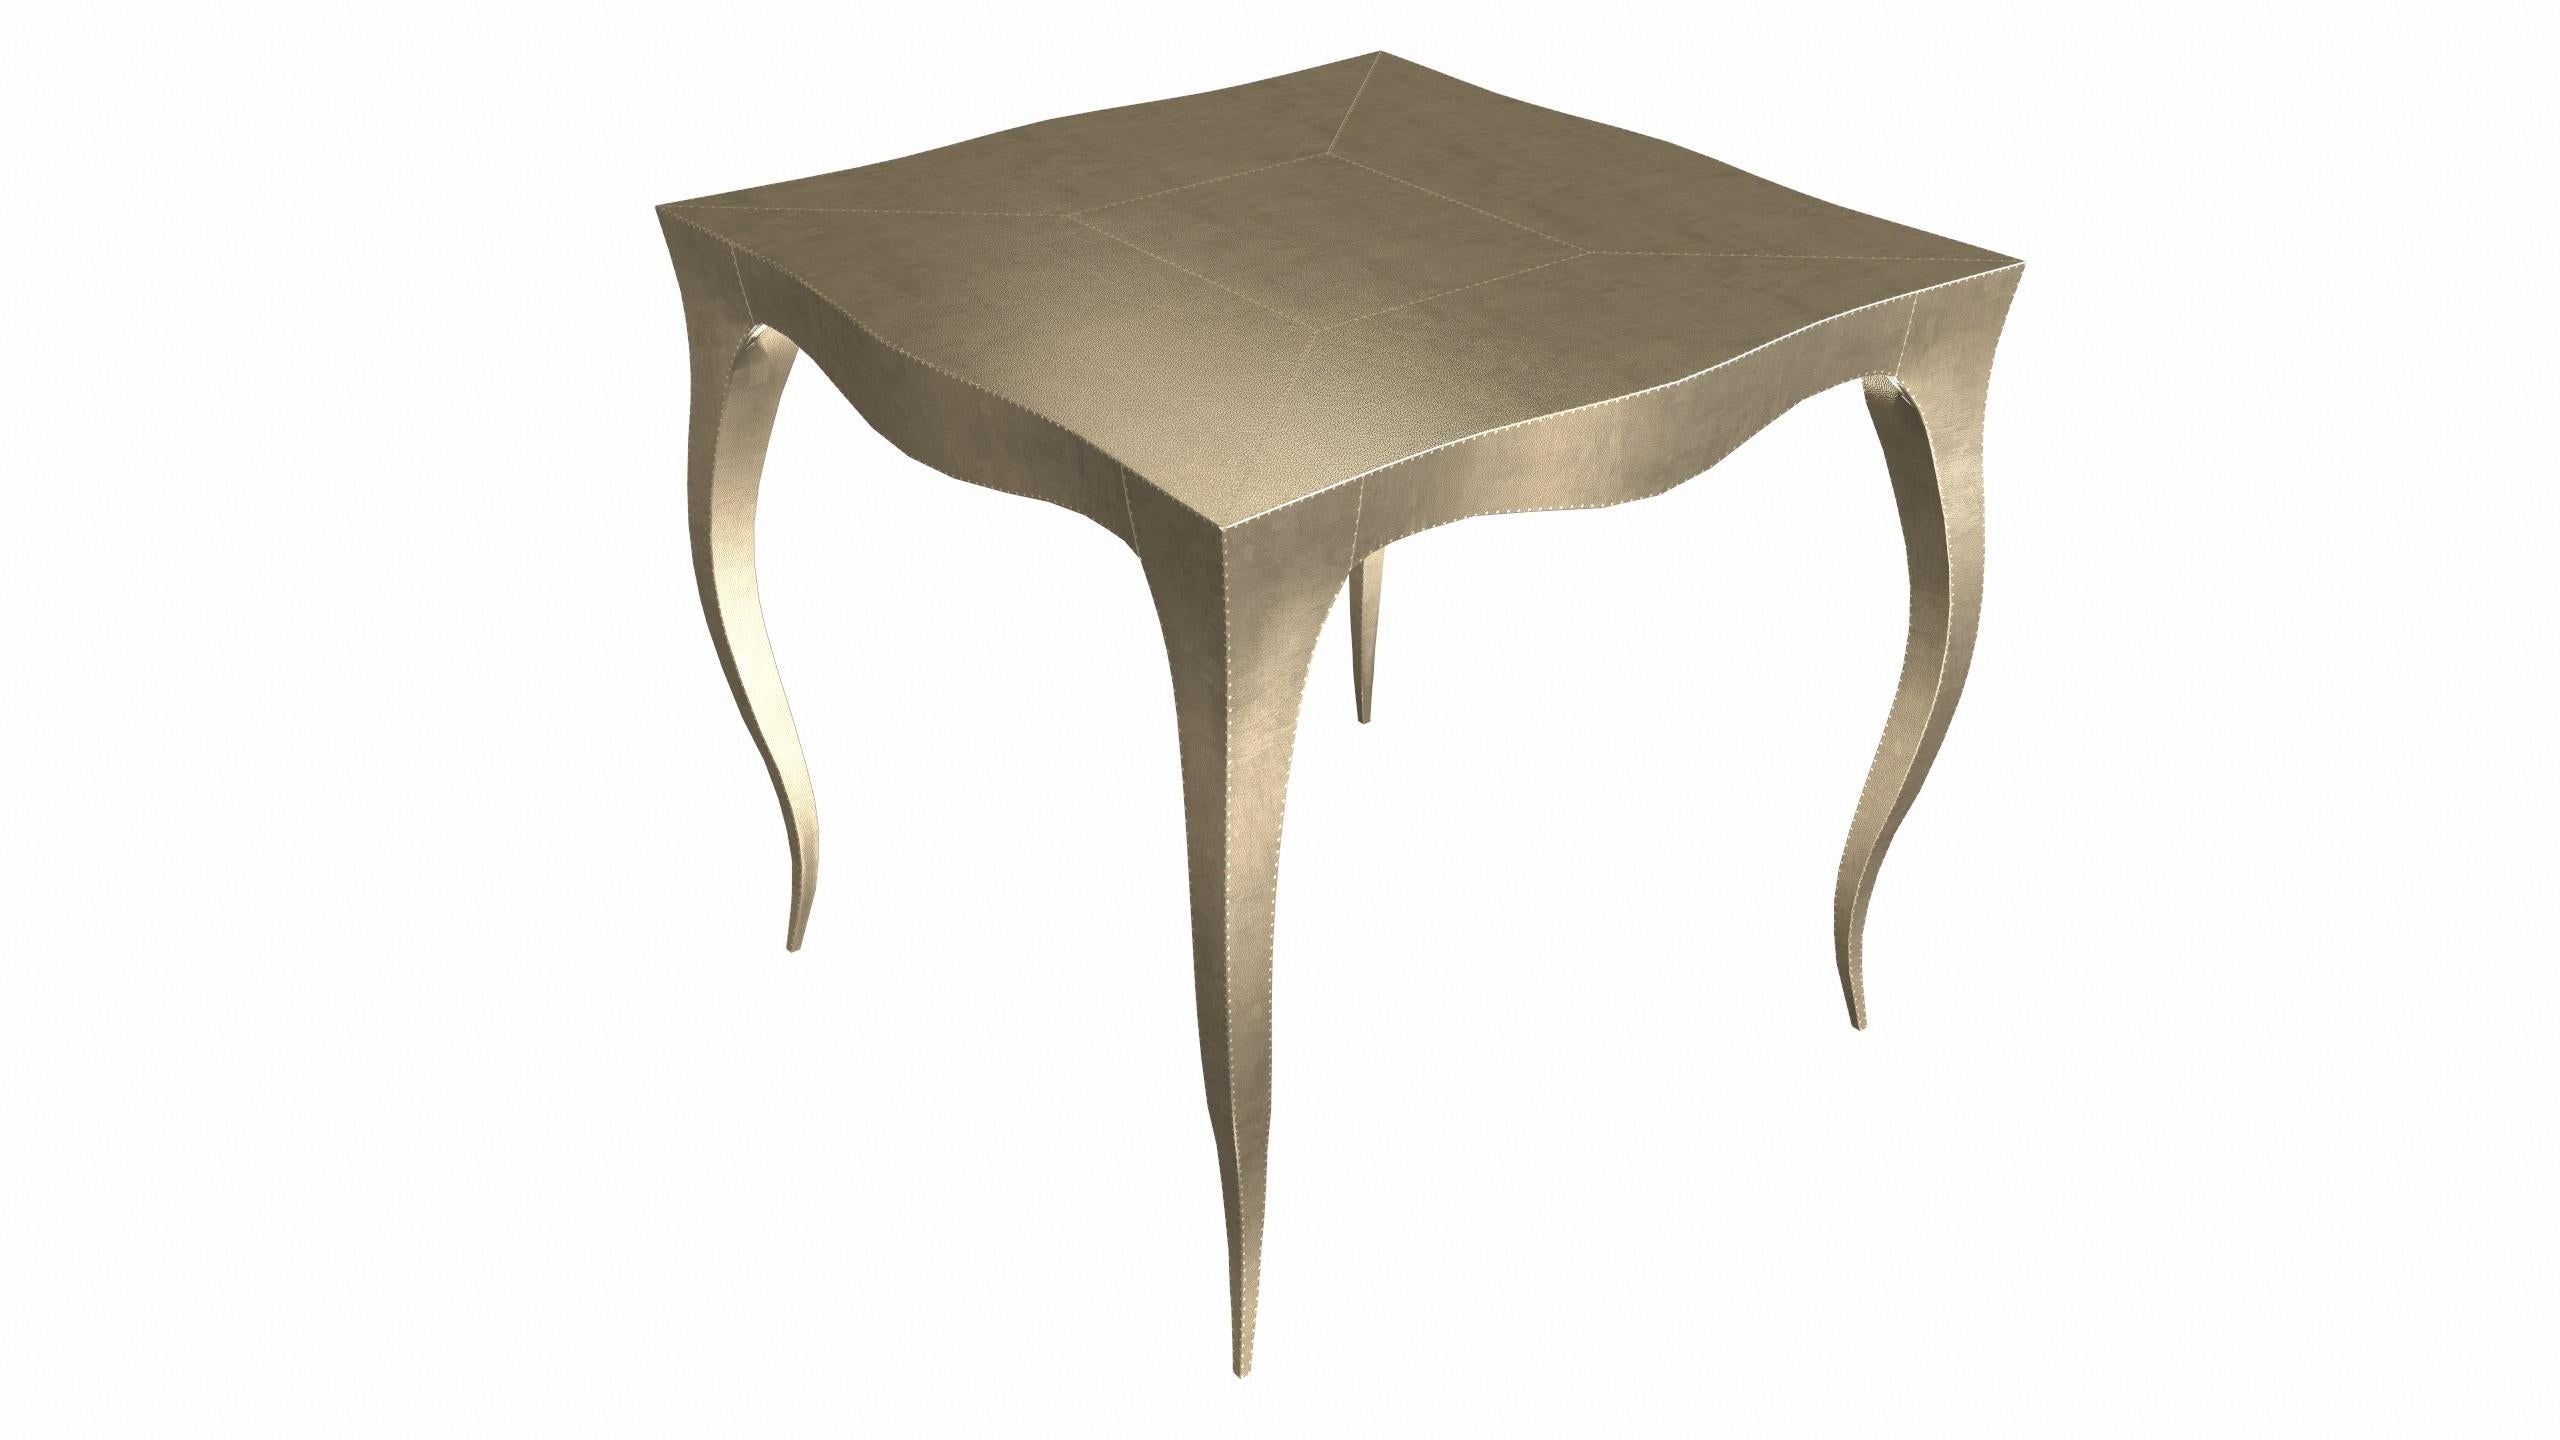 Metal Louise Art Deco Center Tables Mid. Hammered Brass by Paul Mathieu for S.Odegard For Sale